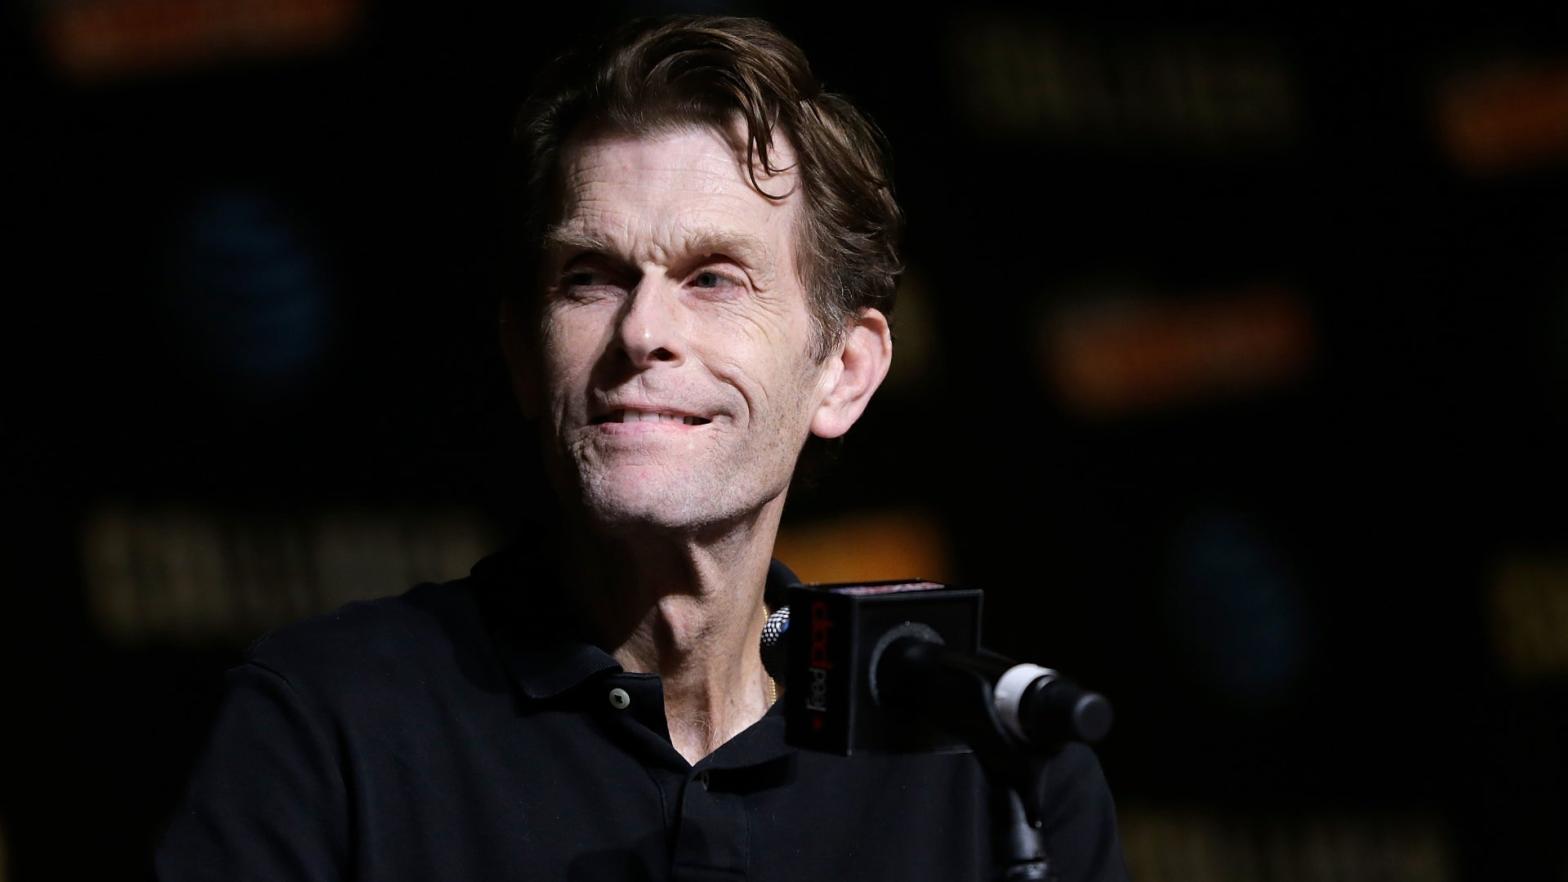 Kevin Conroy during the Batman: The Animated Series 25th Anniversary panel at New York Comic Con 2017. (Photo: John Lamparski, Getty Images)